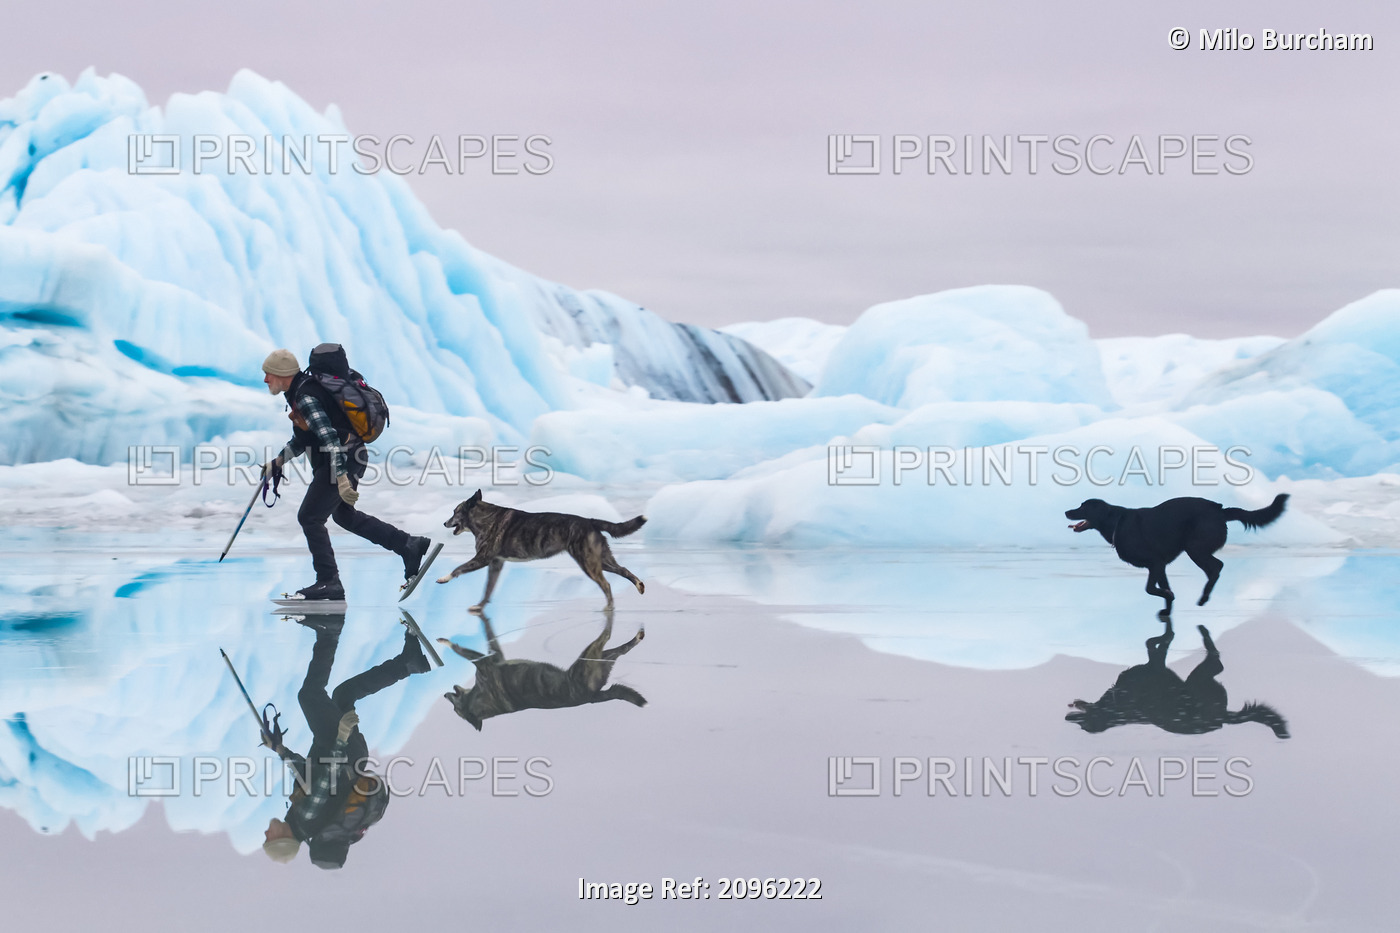 Man Ice Skating At Sheridan Glacier With Two Dogs Reflecting In Thin Layer Of ...